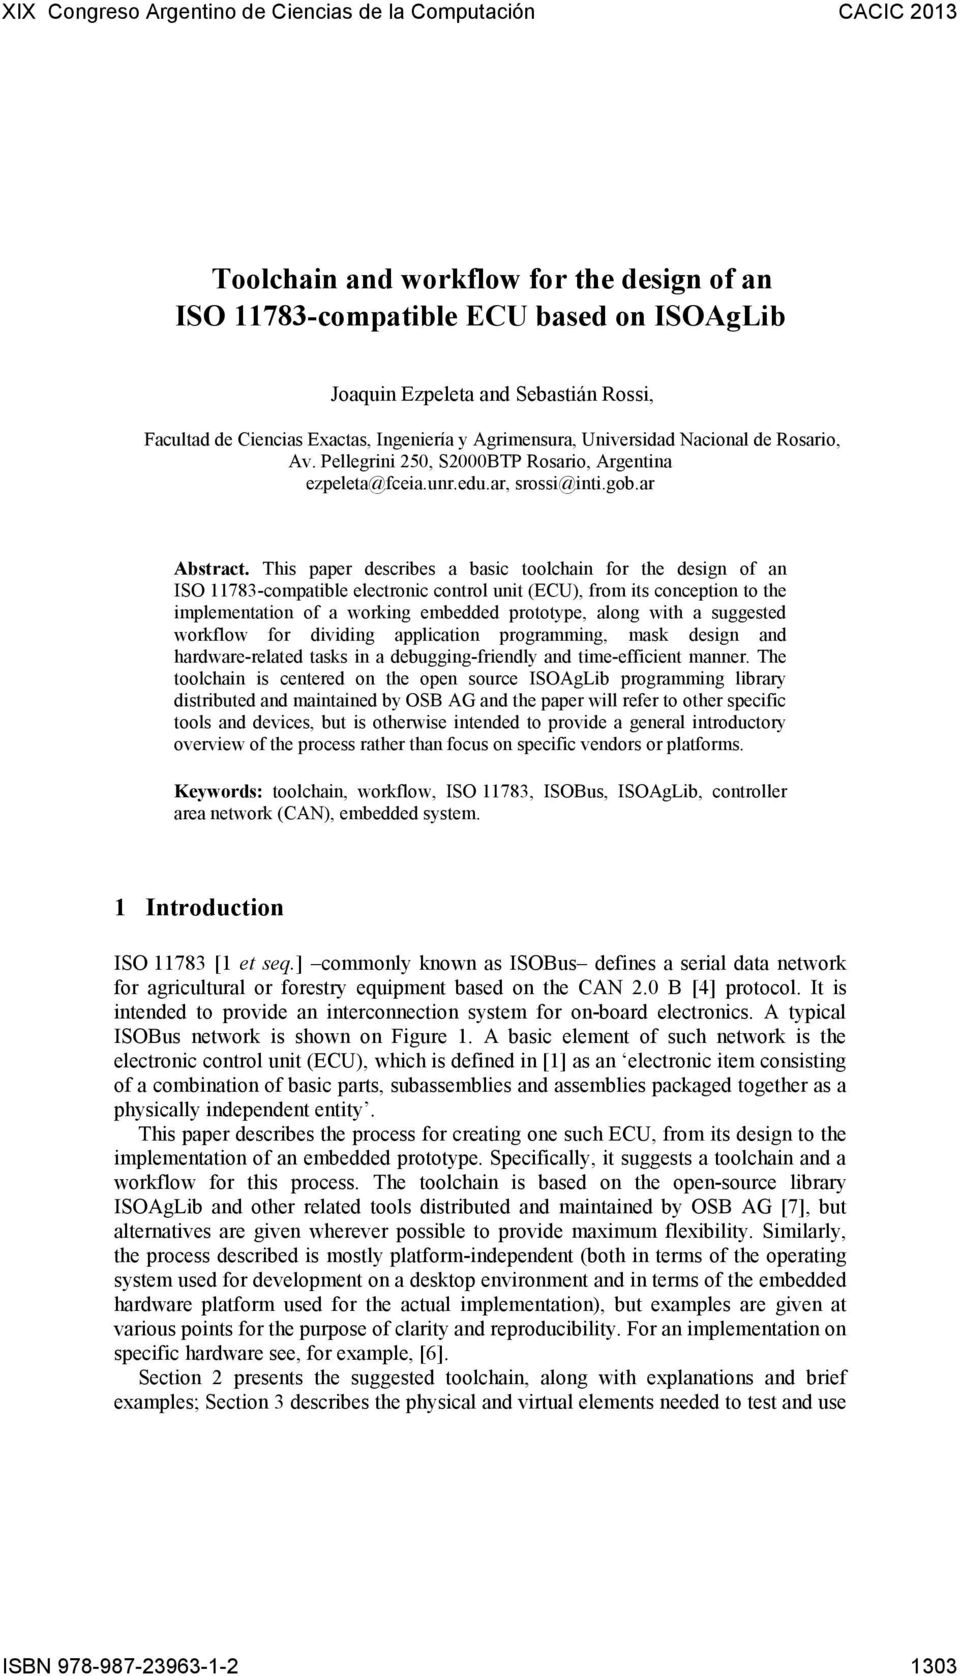 This paper describes a basic toolchain for the design of an ISO 11783-compatible electronic control unit (ECU), from its conception to the implementation of a working embedded prototype, along with a